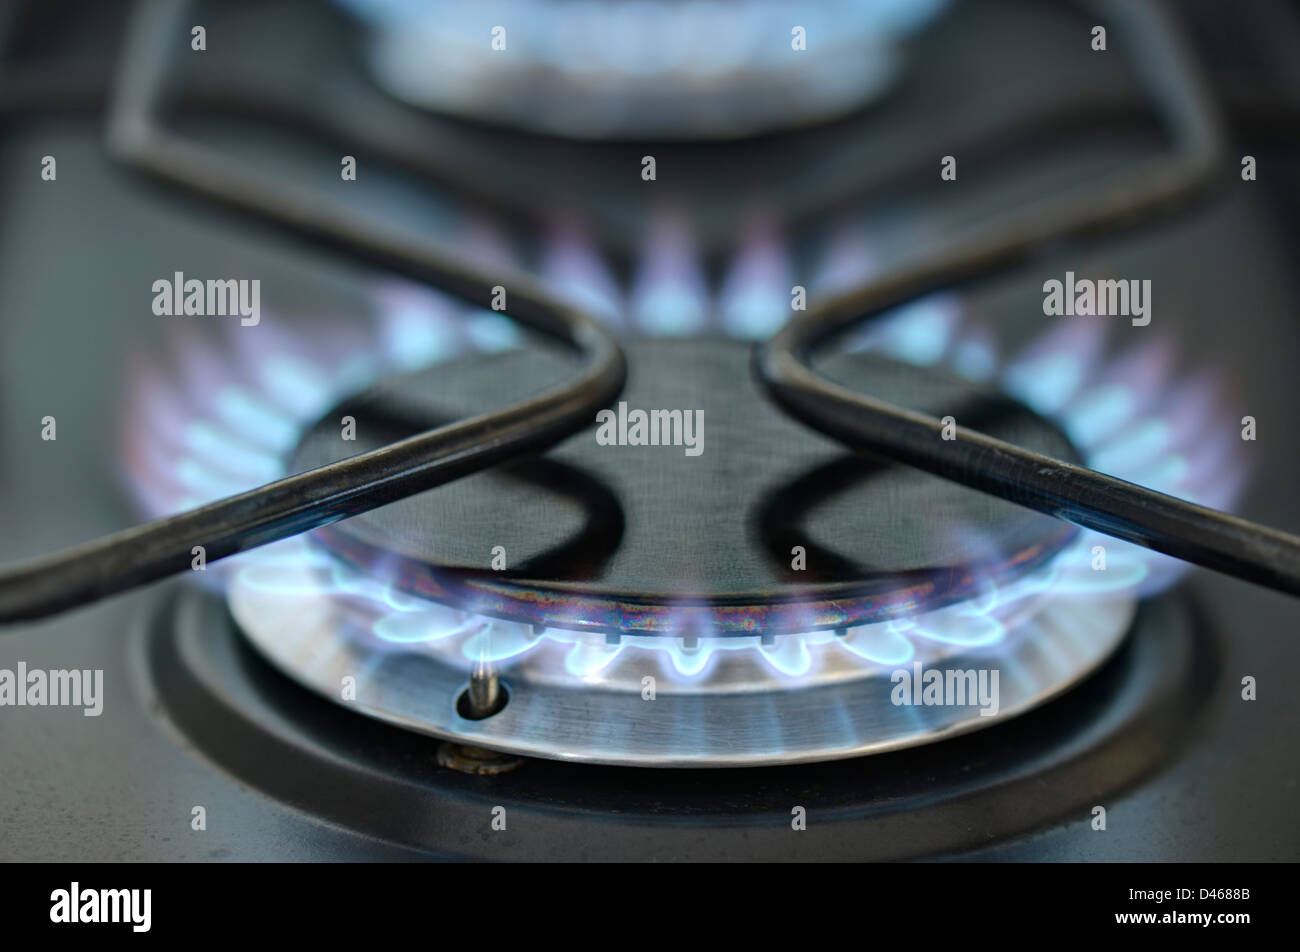 Close-up of burning gas rings on a hob Stock Photo